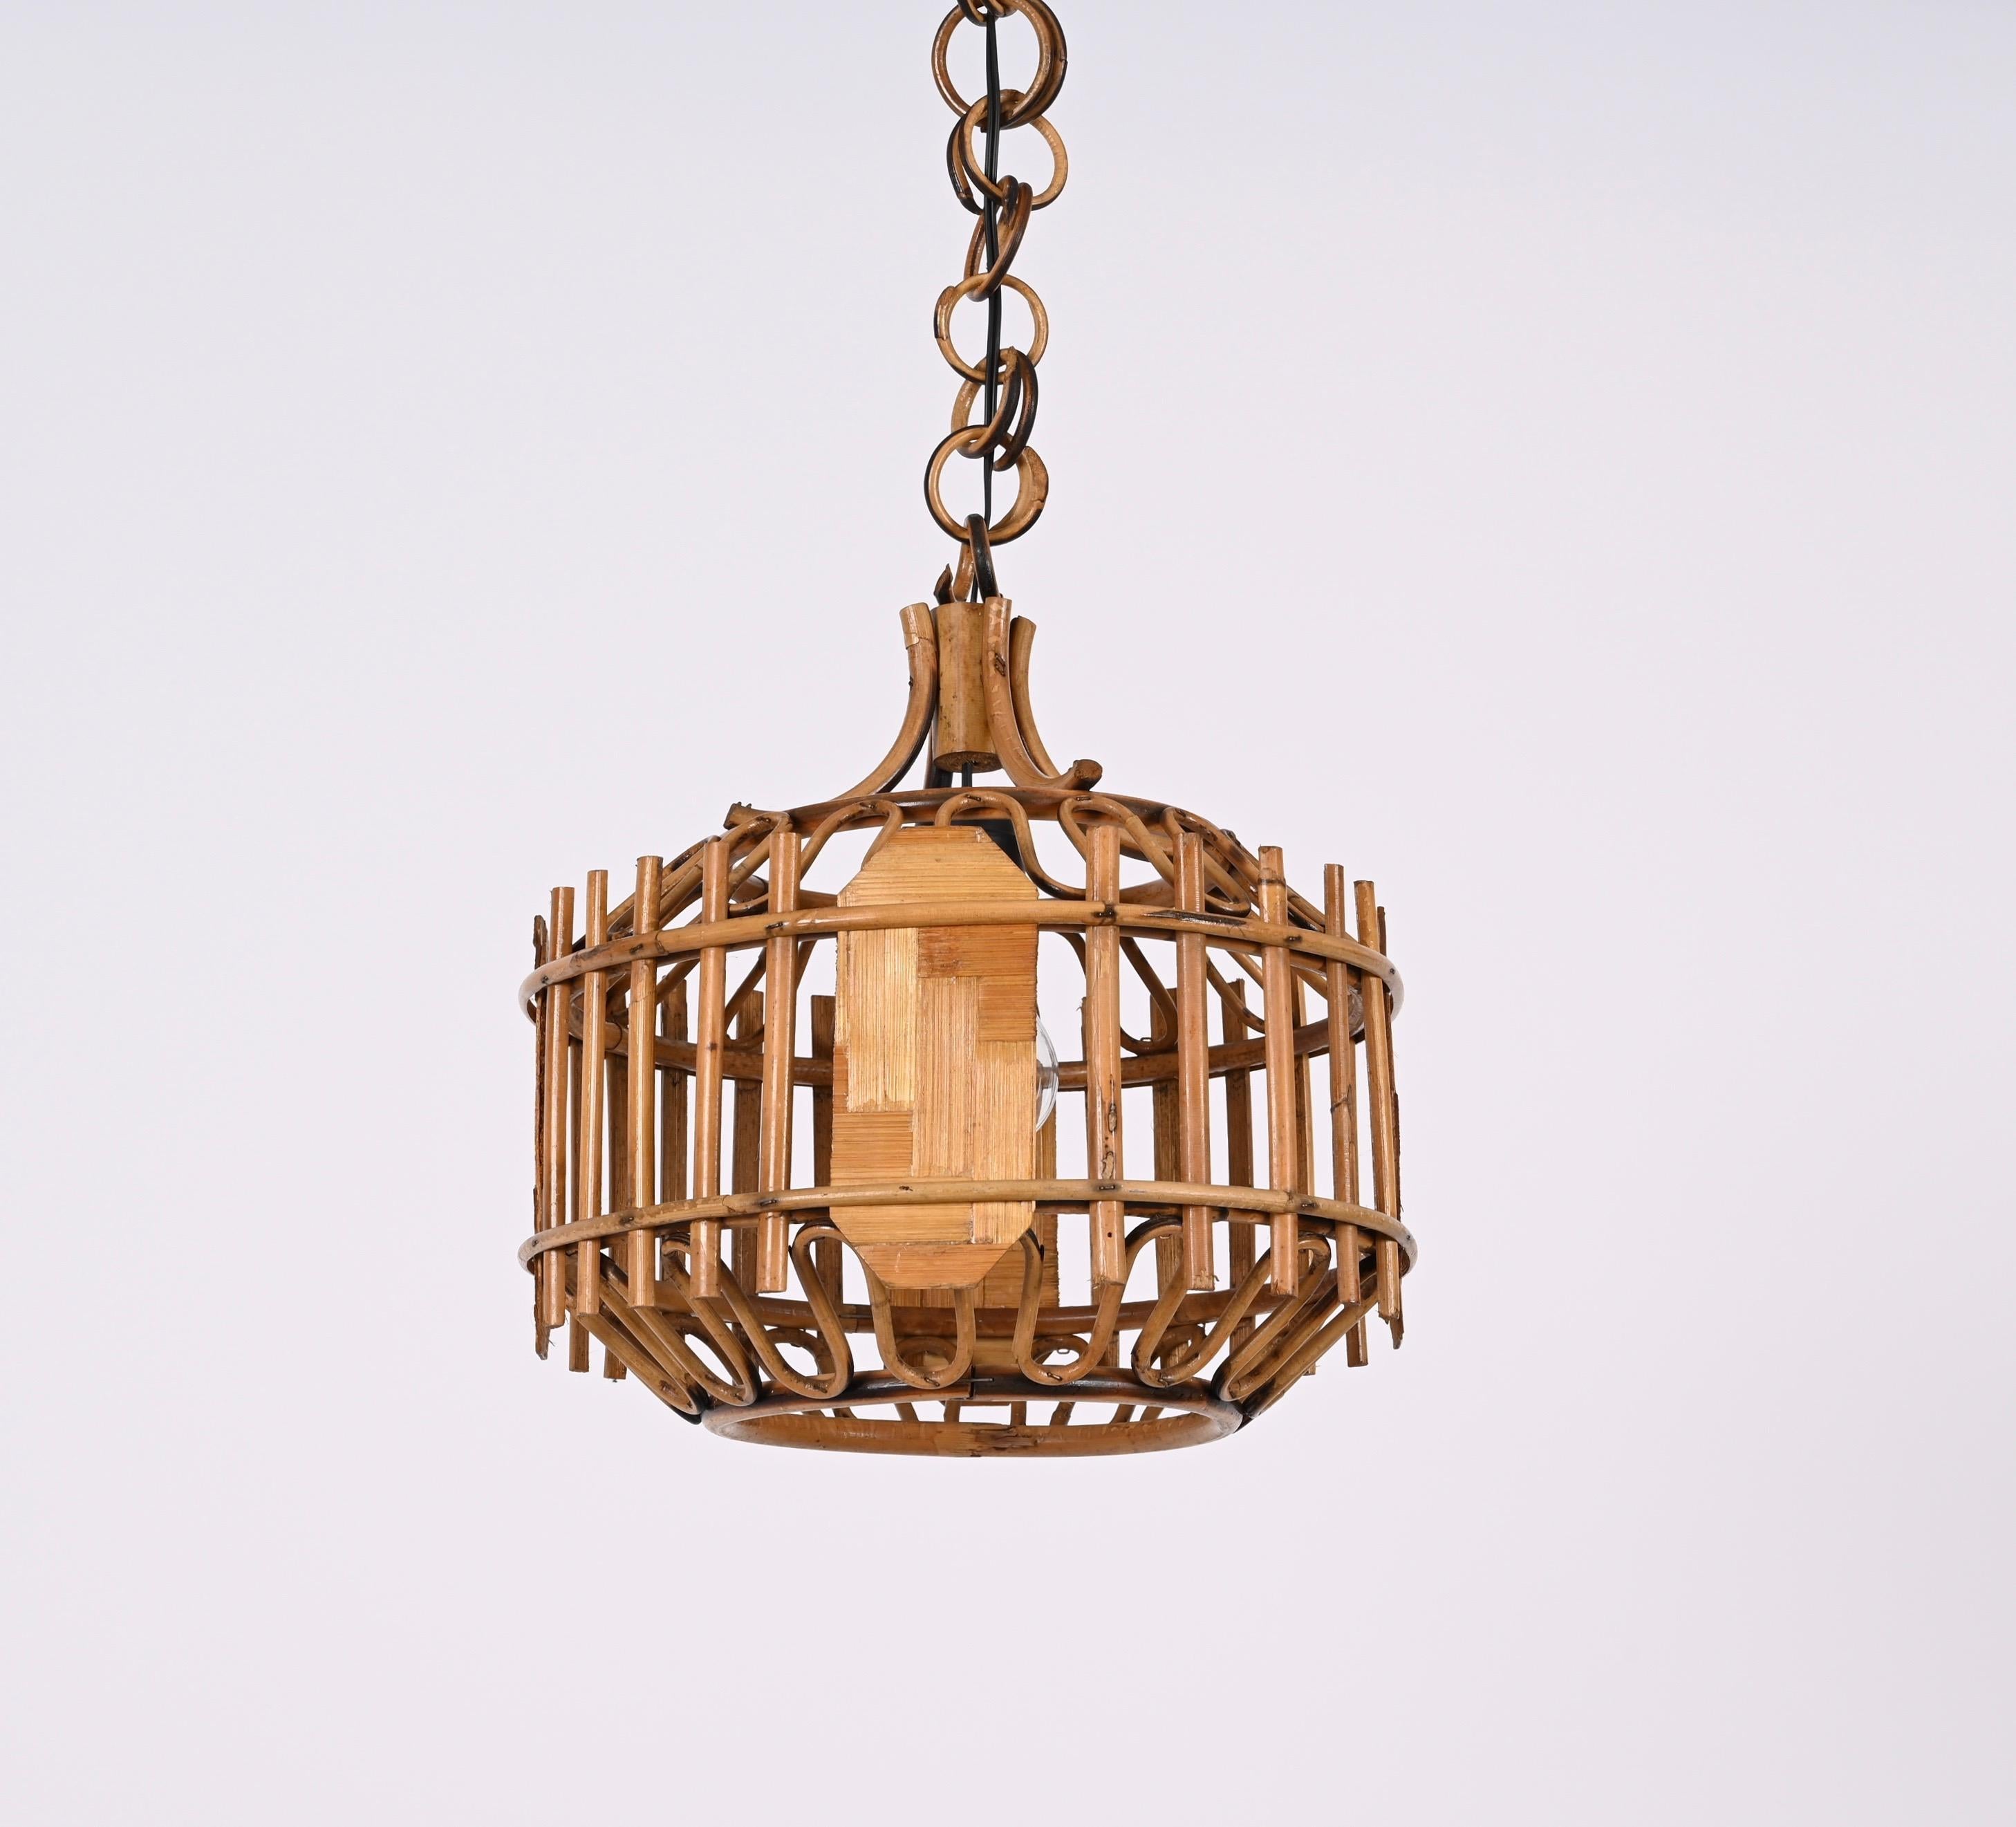 Midcentury French Riviera Bambo and Rattan Rounded Italian Chandelier, 1960s For Sale 10